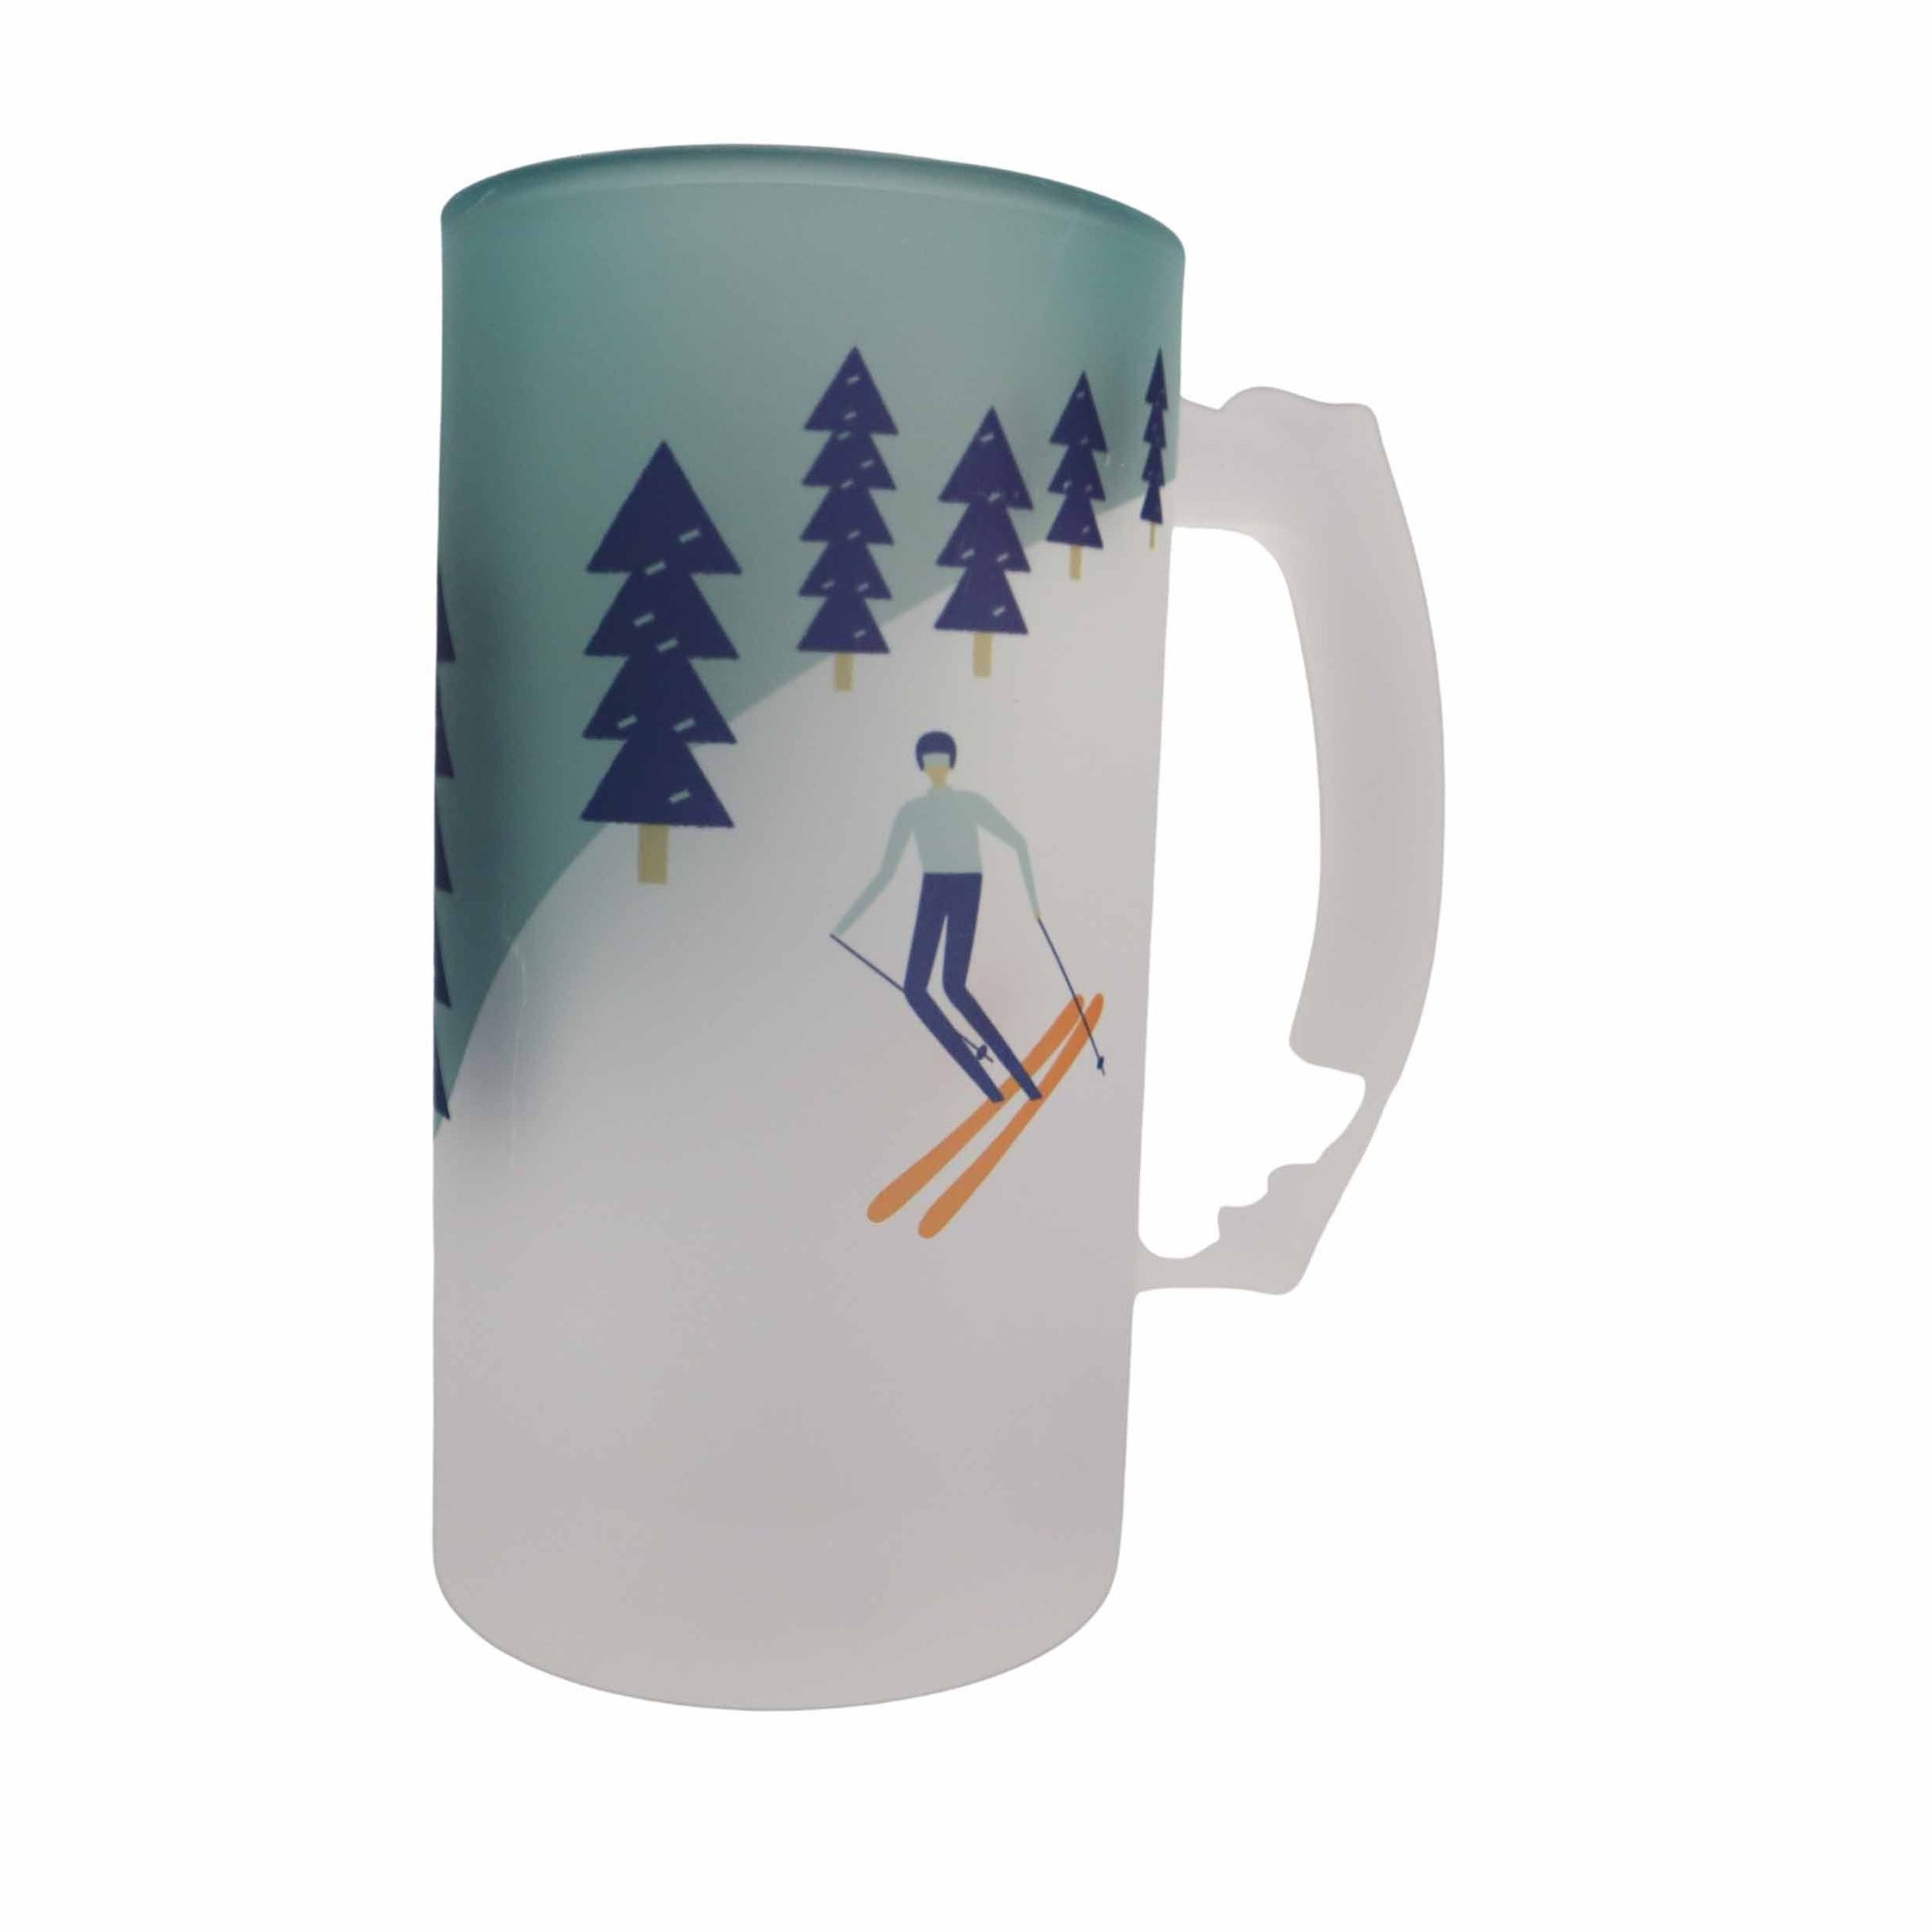 Snow Skiing with The mountains are calling slogan printed onto a frosted glass beer stein from Mustard and Gray